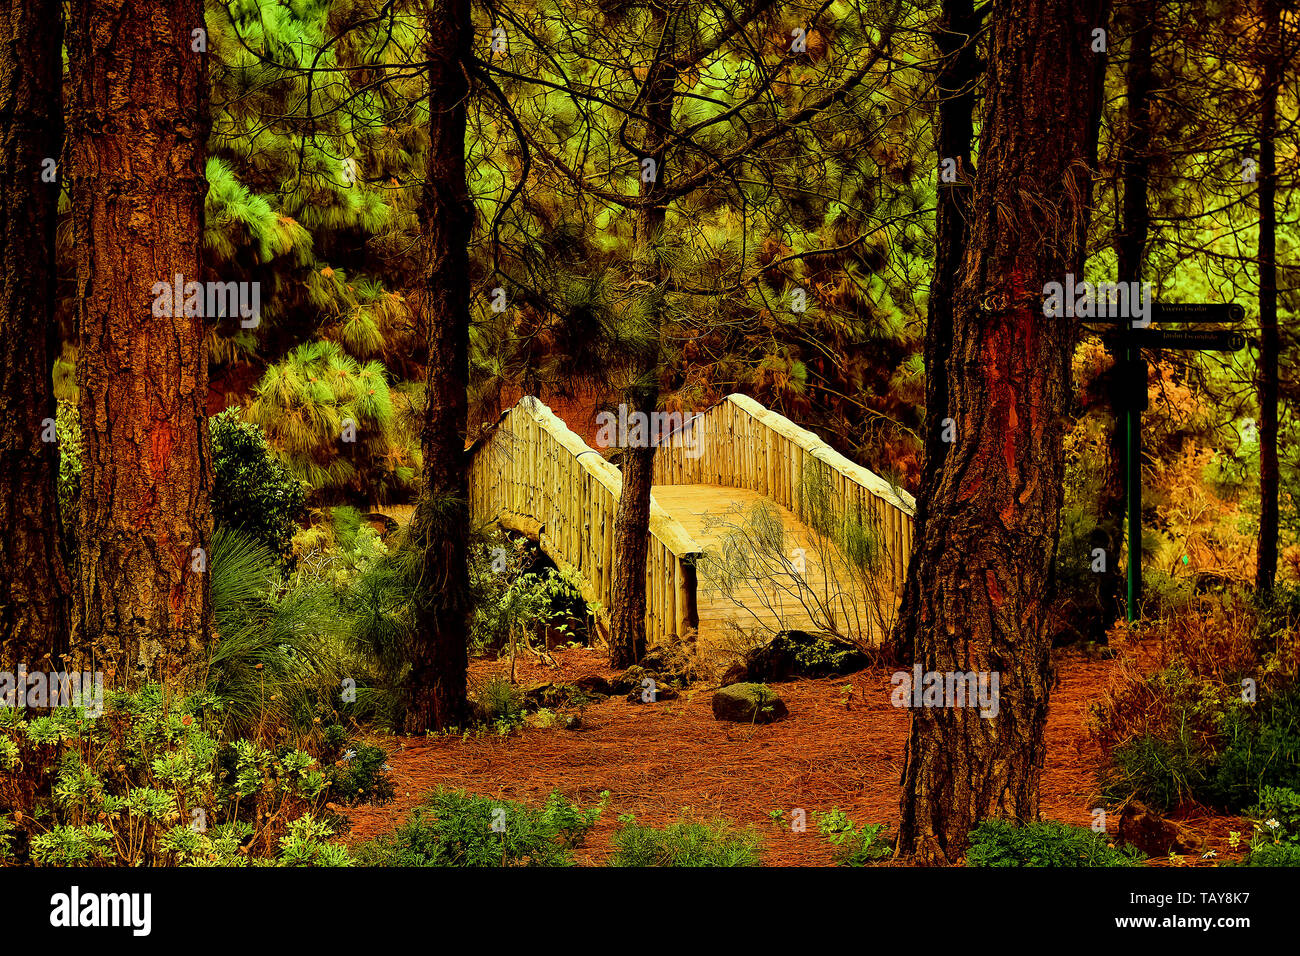 canary islands Forest garden Stock Photo